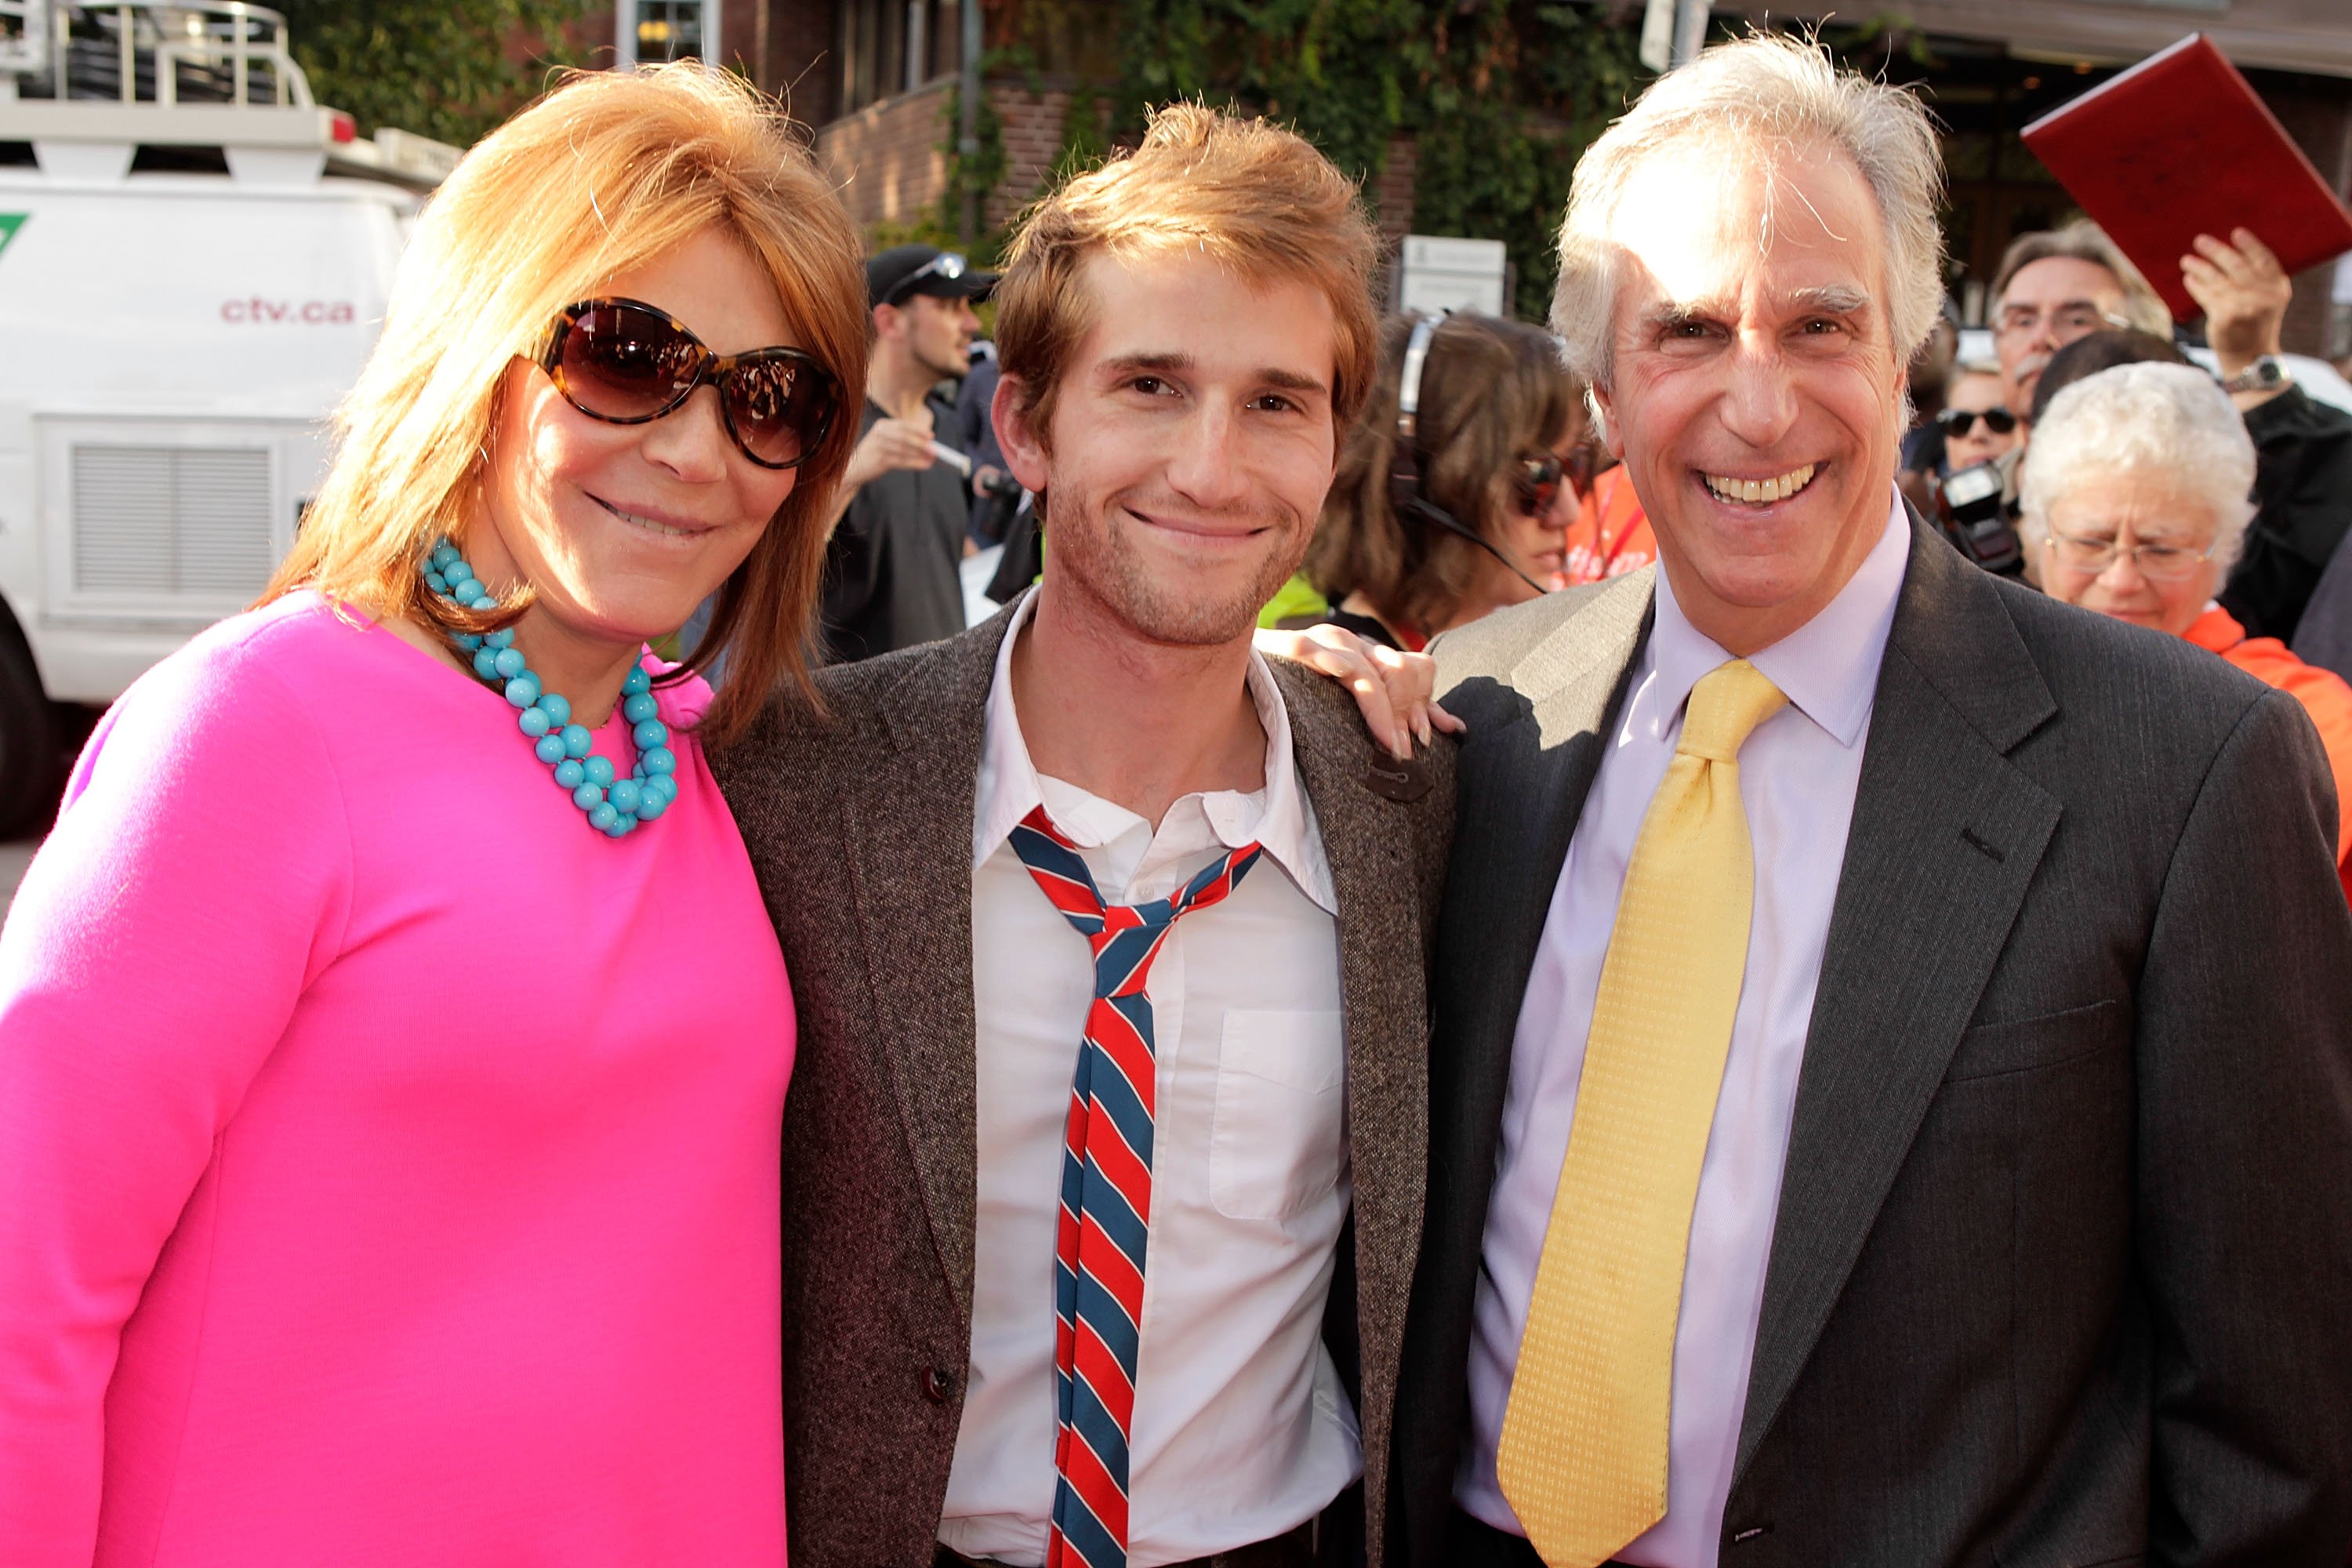 Stacey Winkler, Max Winkler, and Henry Winkler at the Isabel Bader Theatre on September 13, 2010 in Toronto, Canada | Source: Getty Images